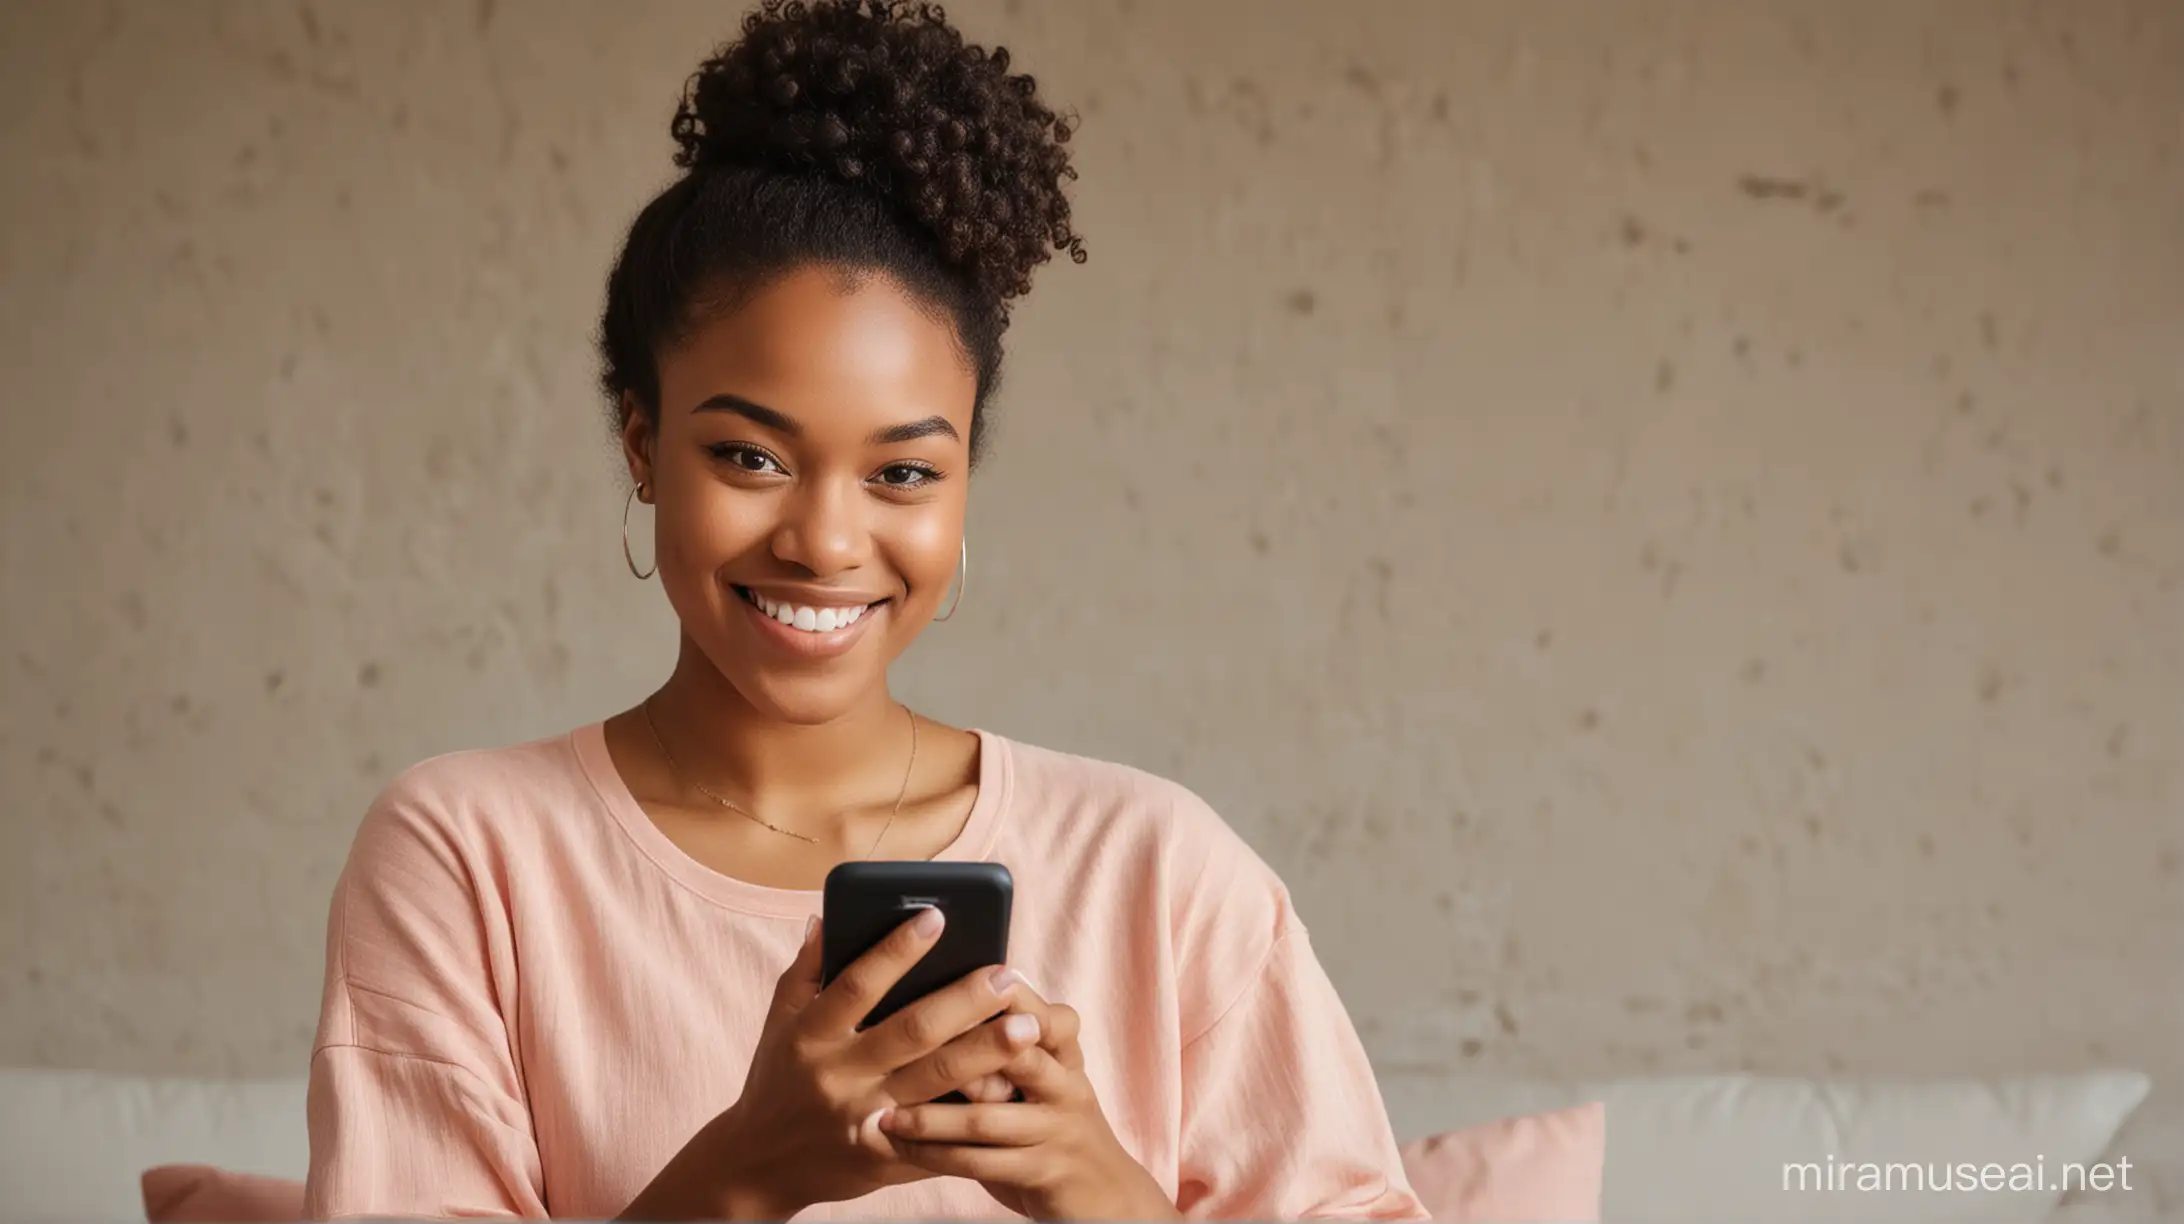 African American young woman smiling and texting on her phone.